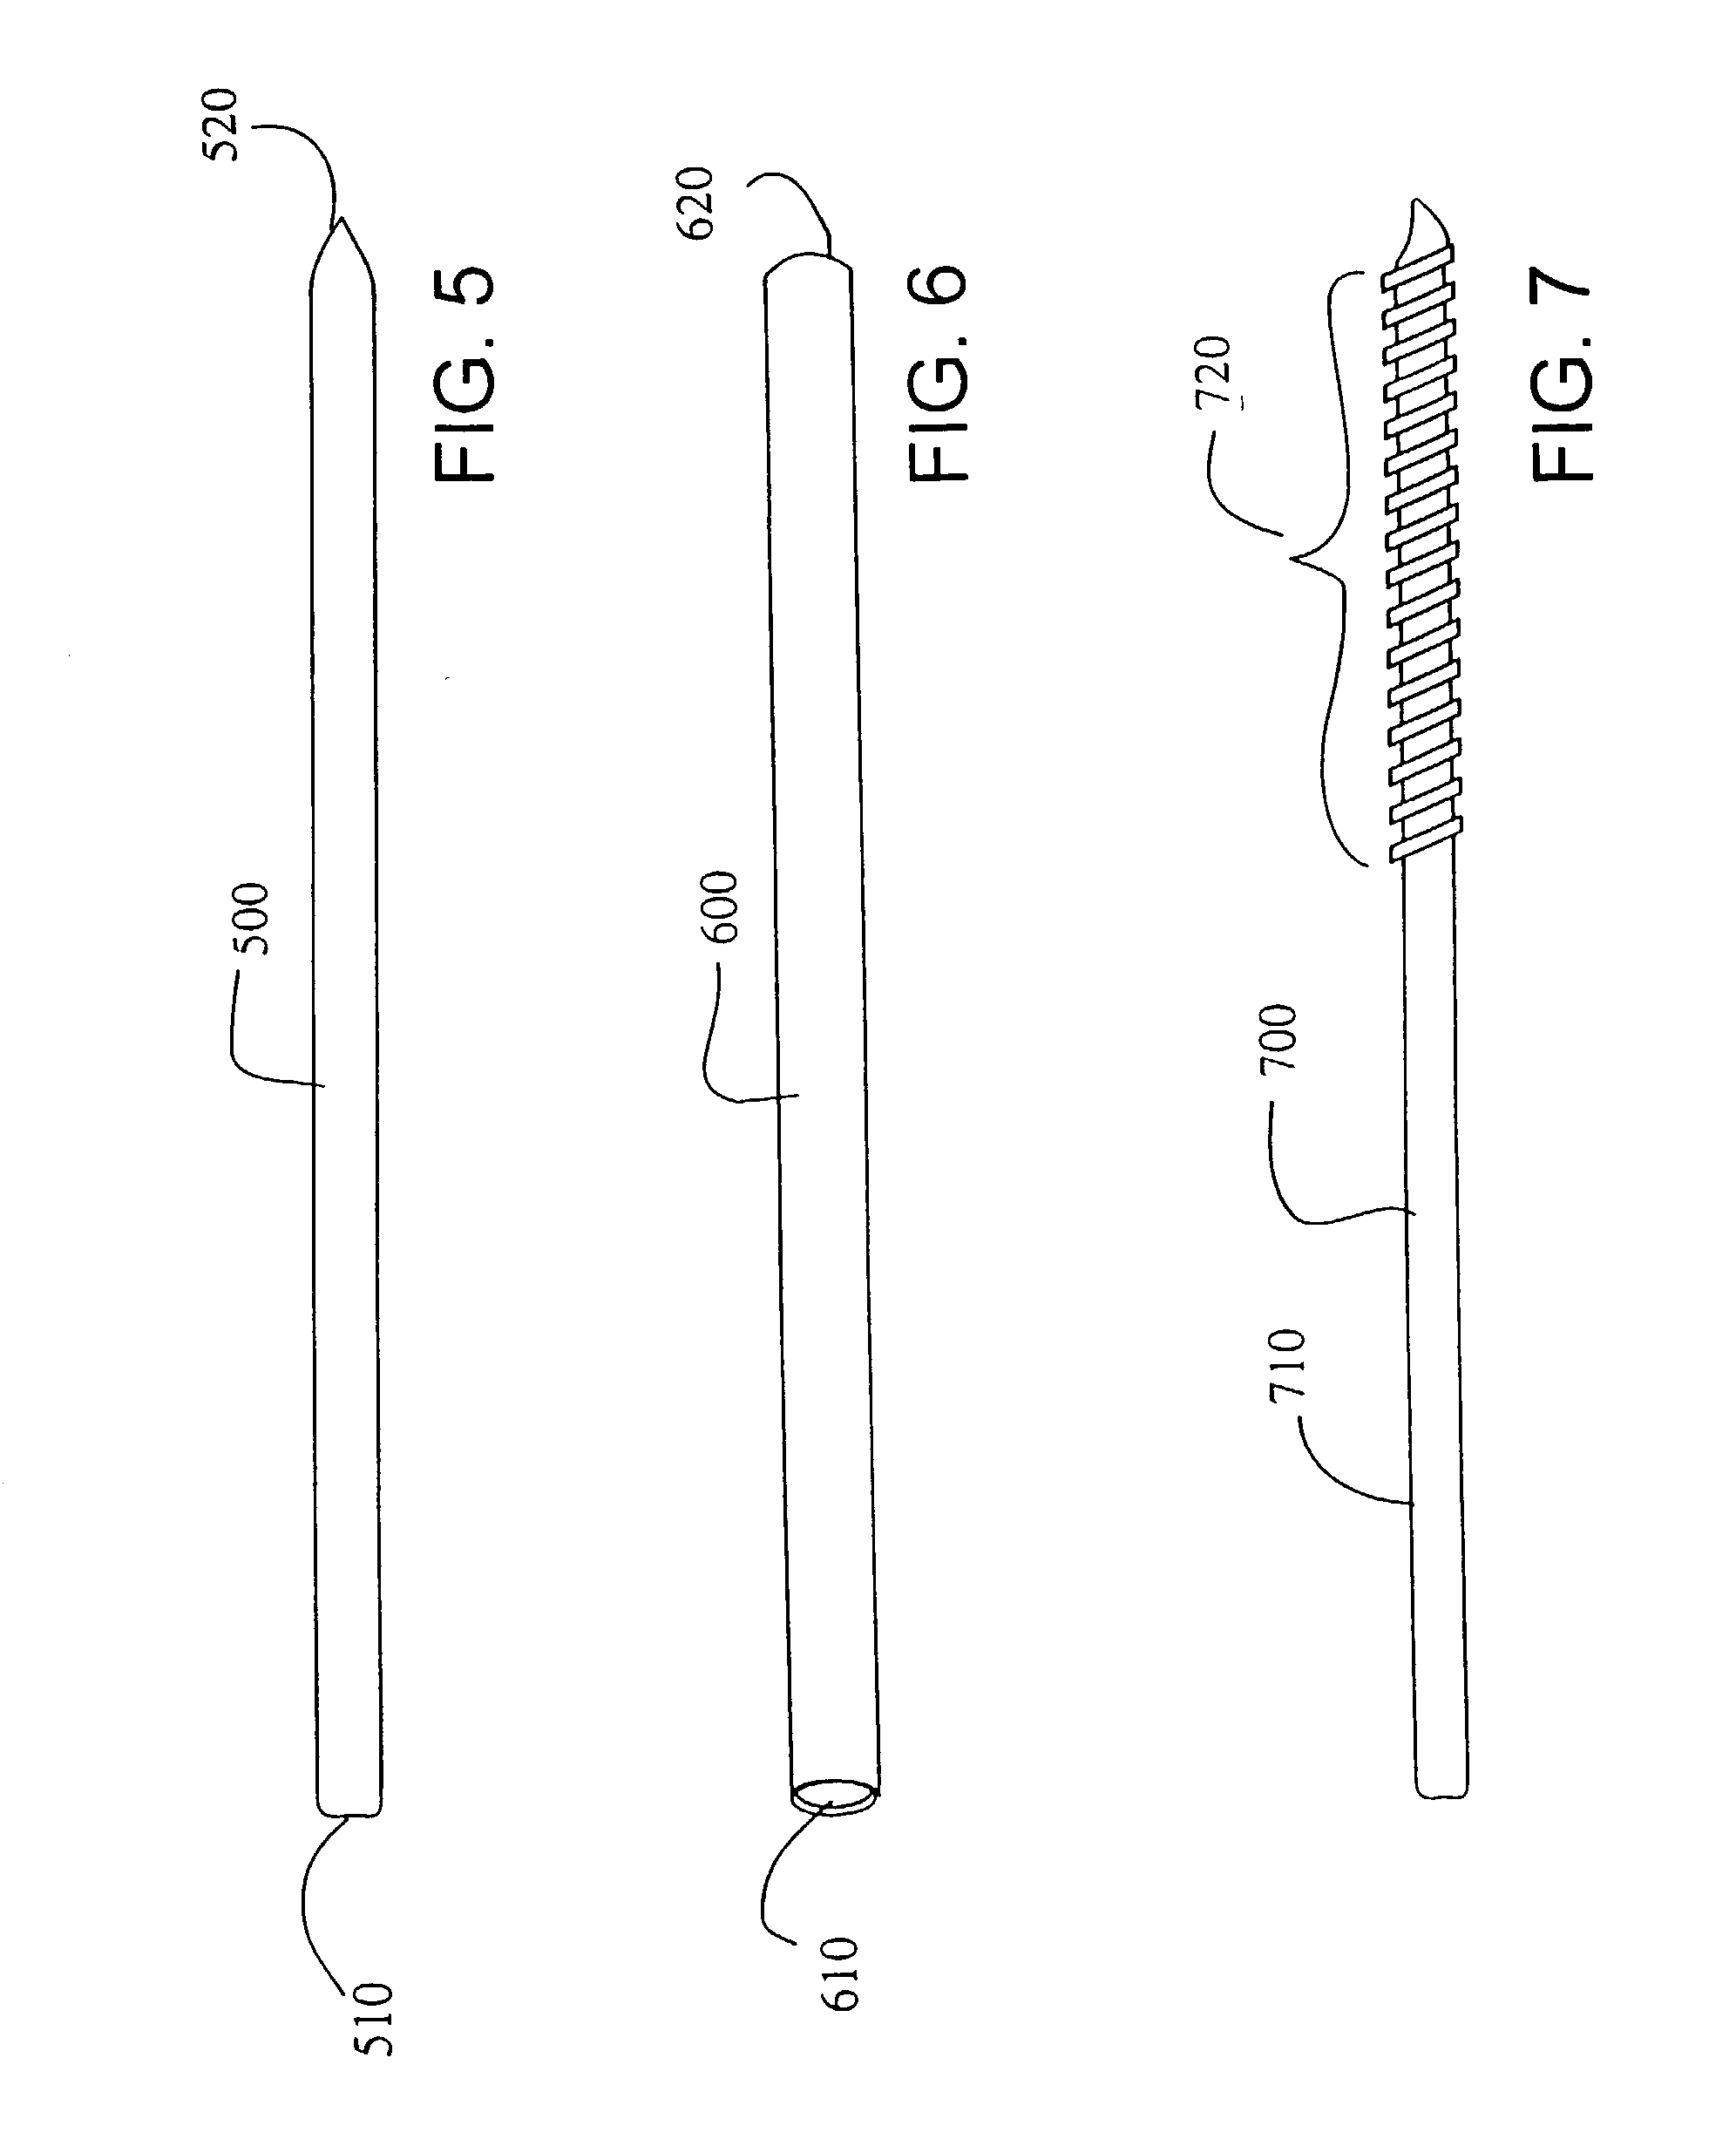 Method and apparatus for treating osteochondral pathologies